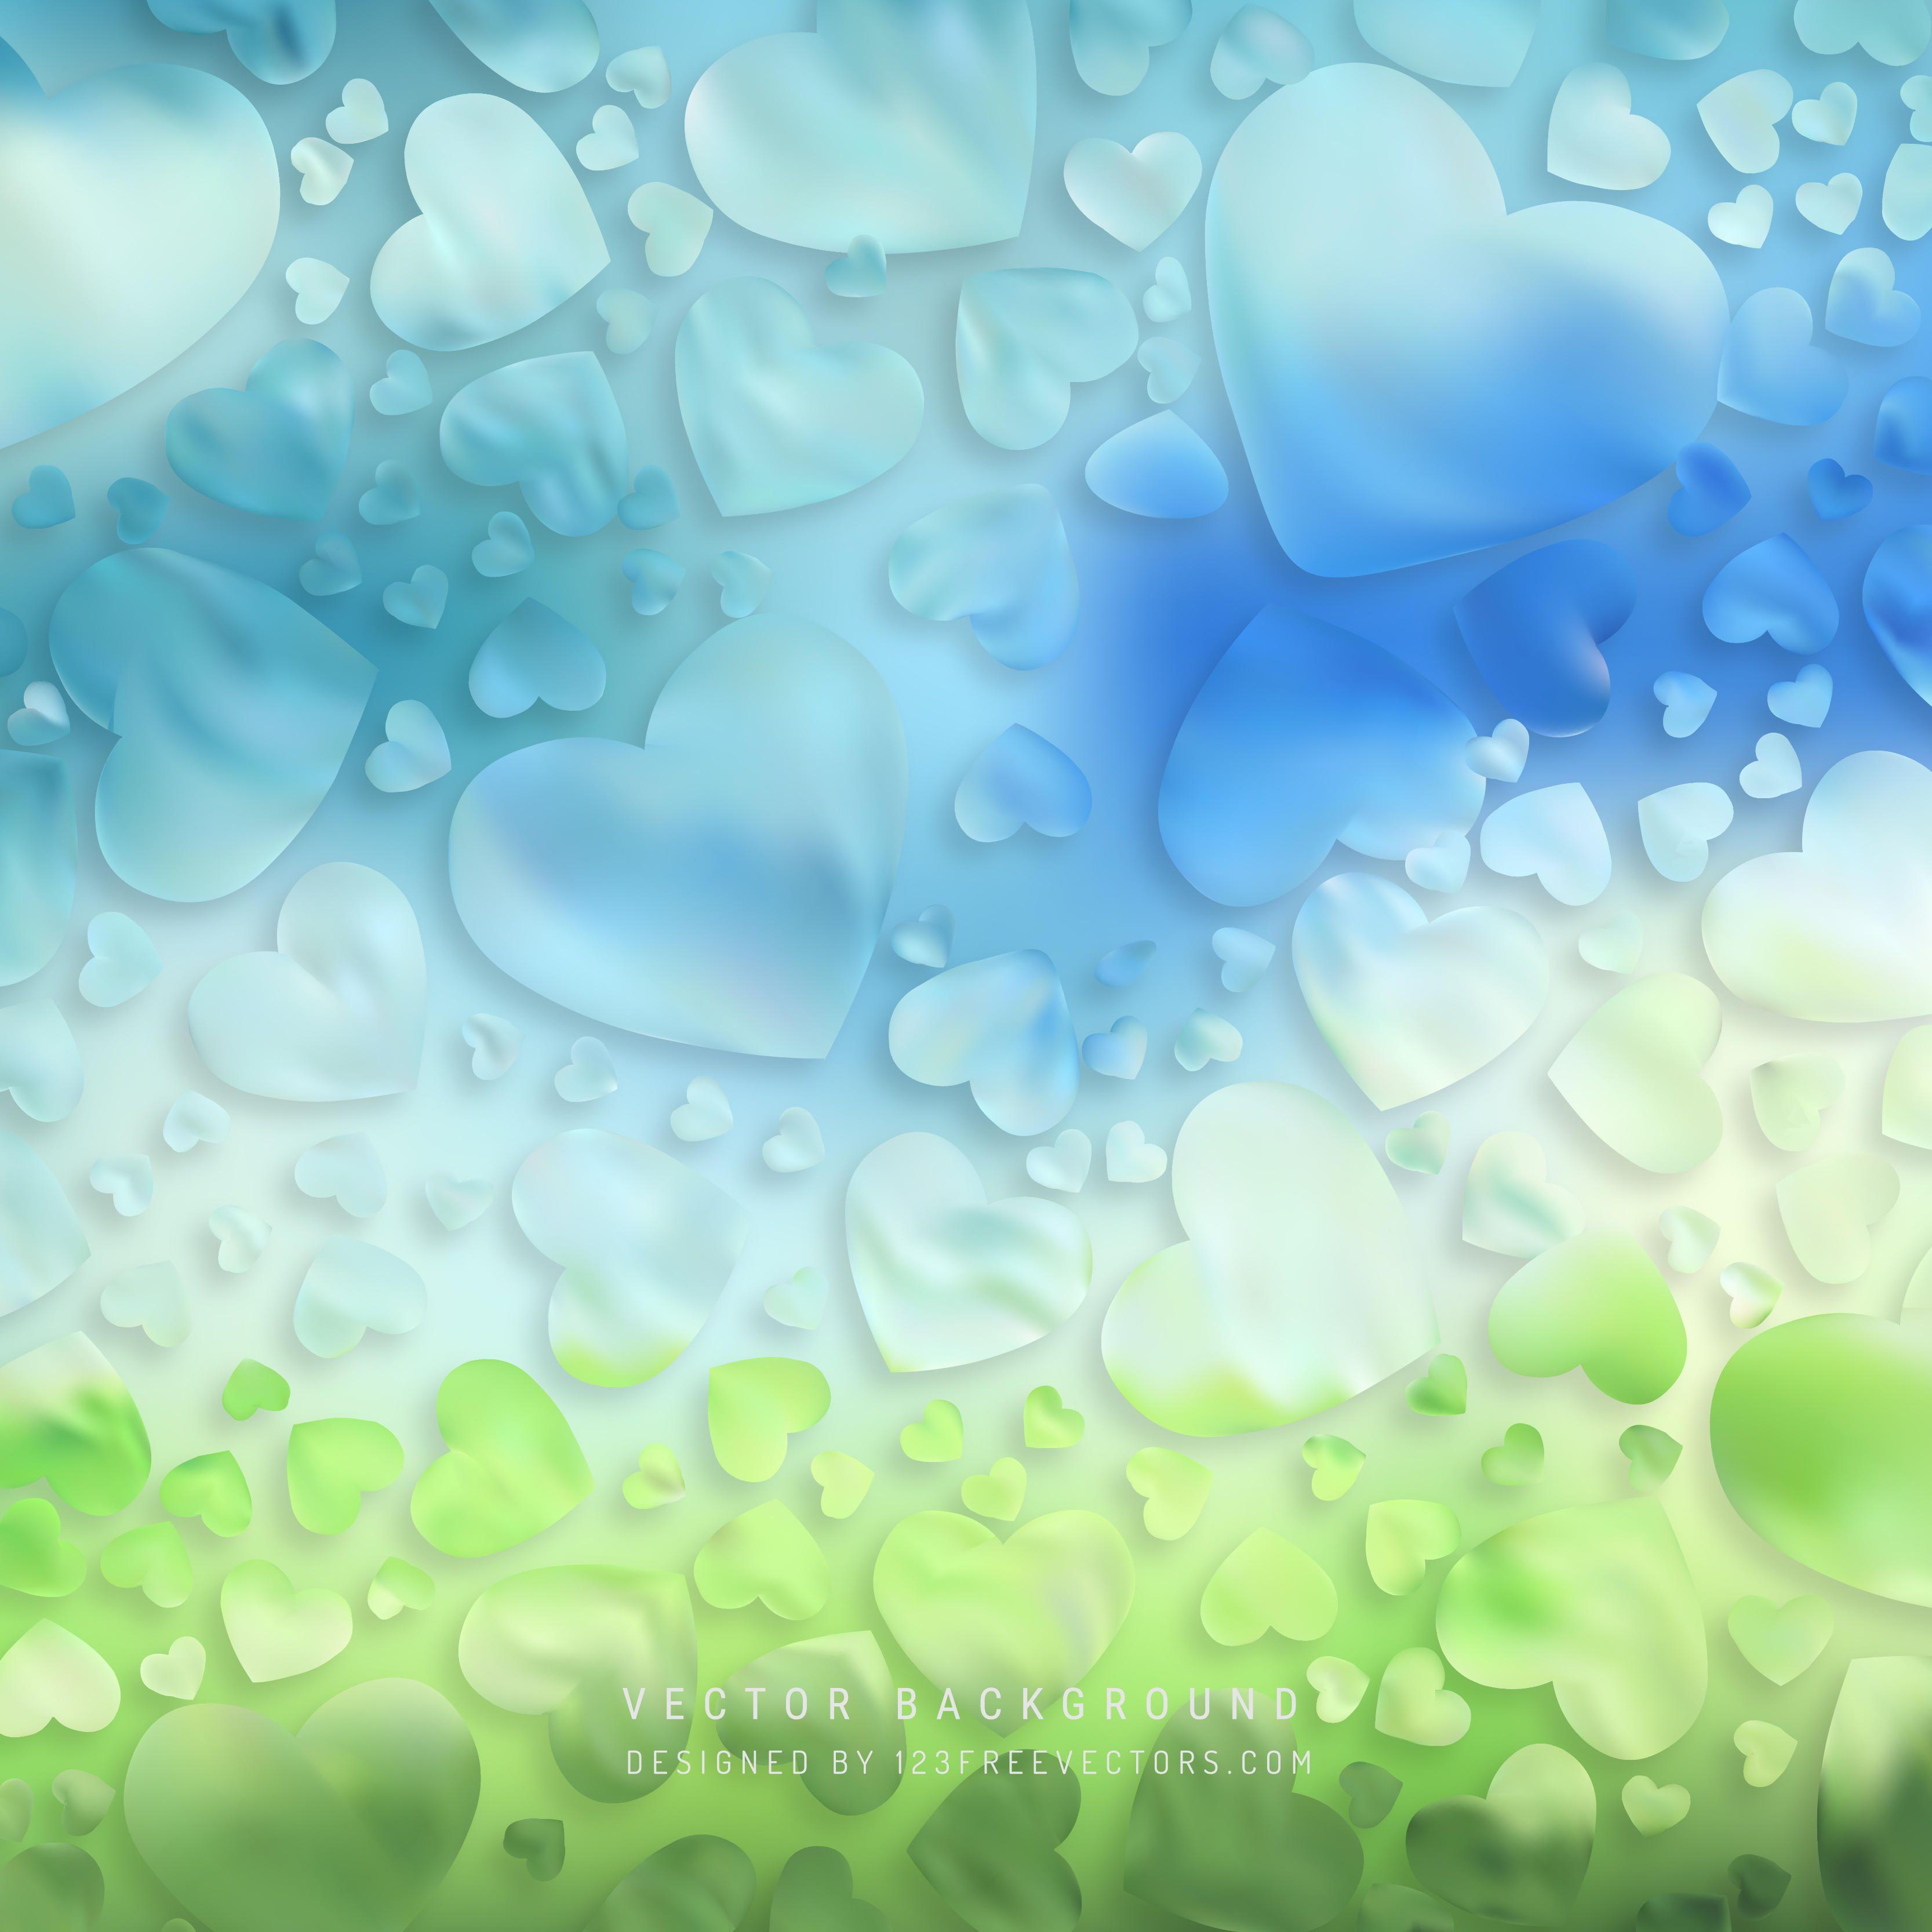 Abstract Romantic Blue Green Hearts BackgroundFreevectors